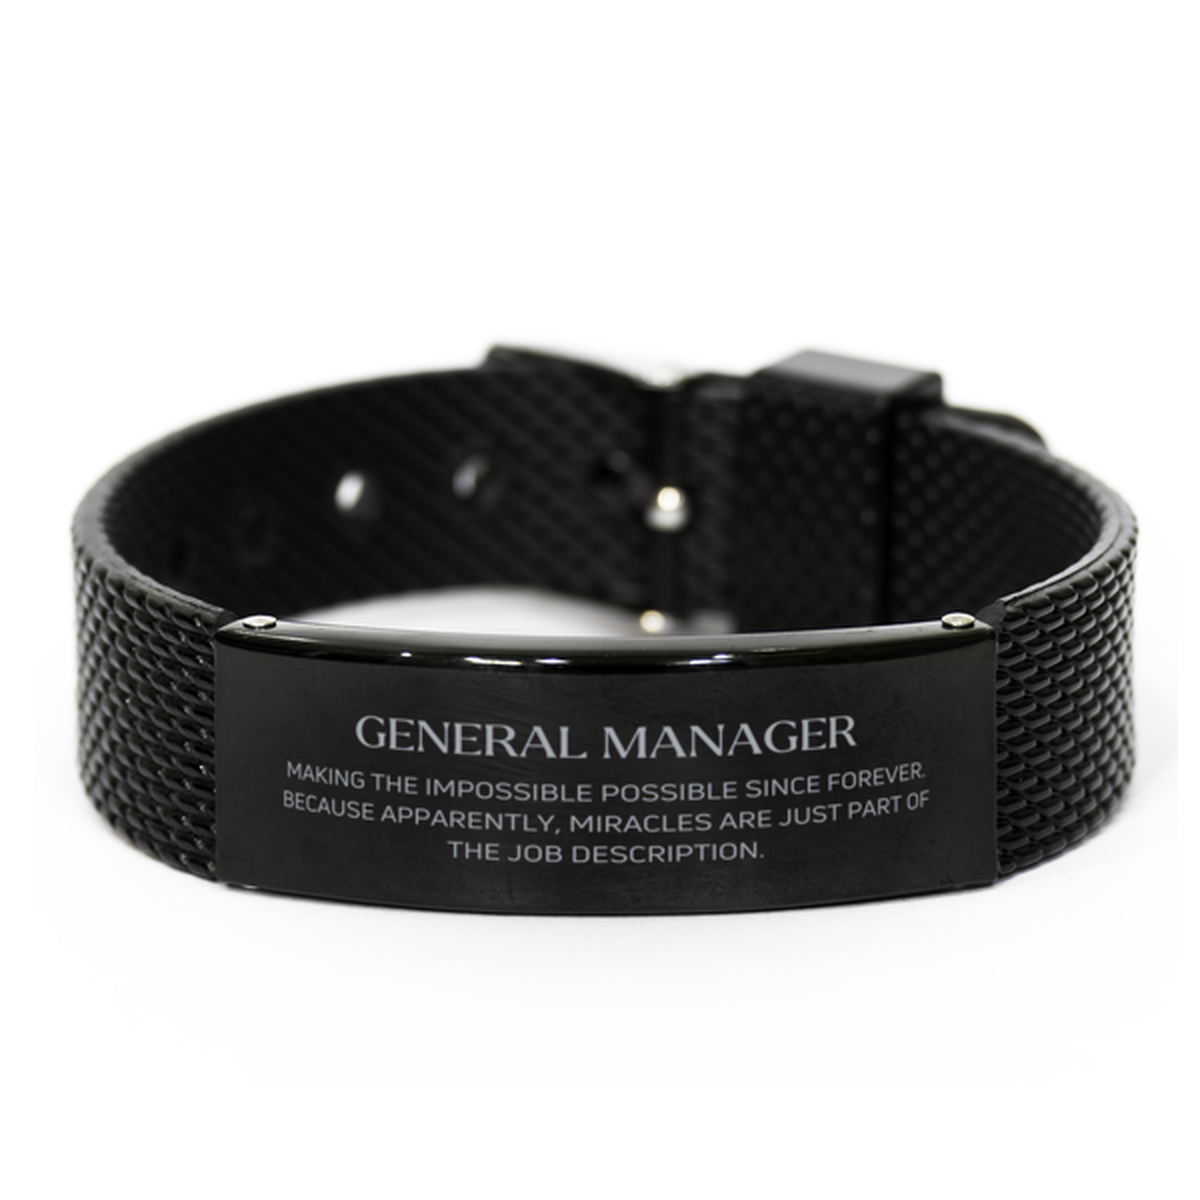 Funny General Manager Gifts, Miracles are just part of the job description, Inspirational Birthday Black Shark Mesh Bracelet For General Manager, Men, Women, Coworkers, Friends, Boss